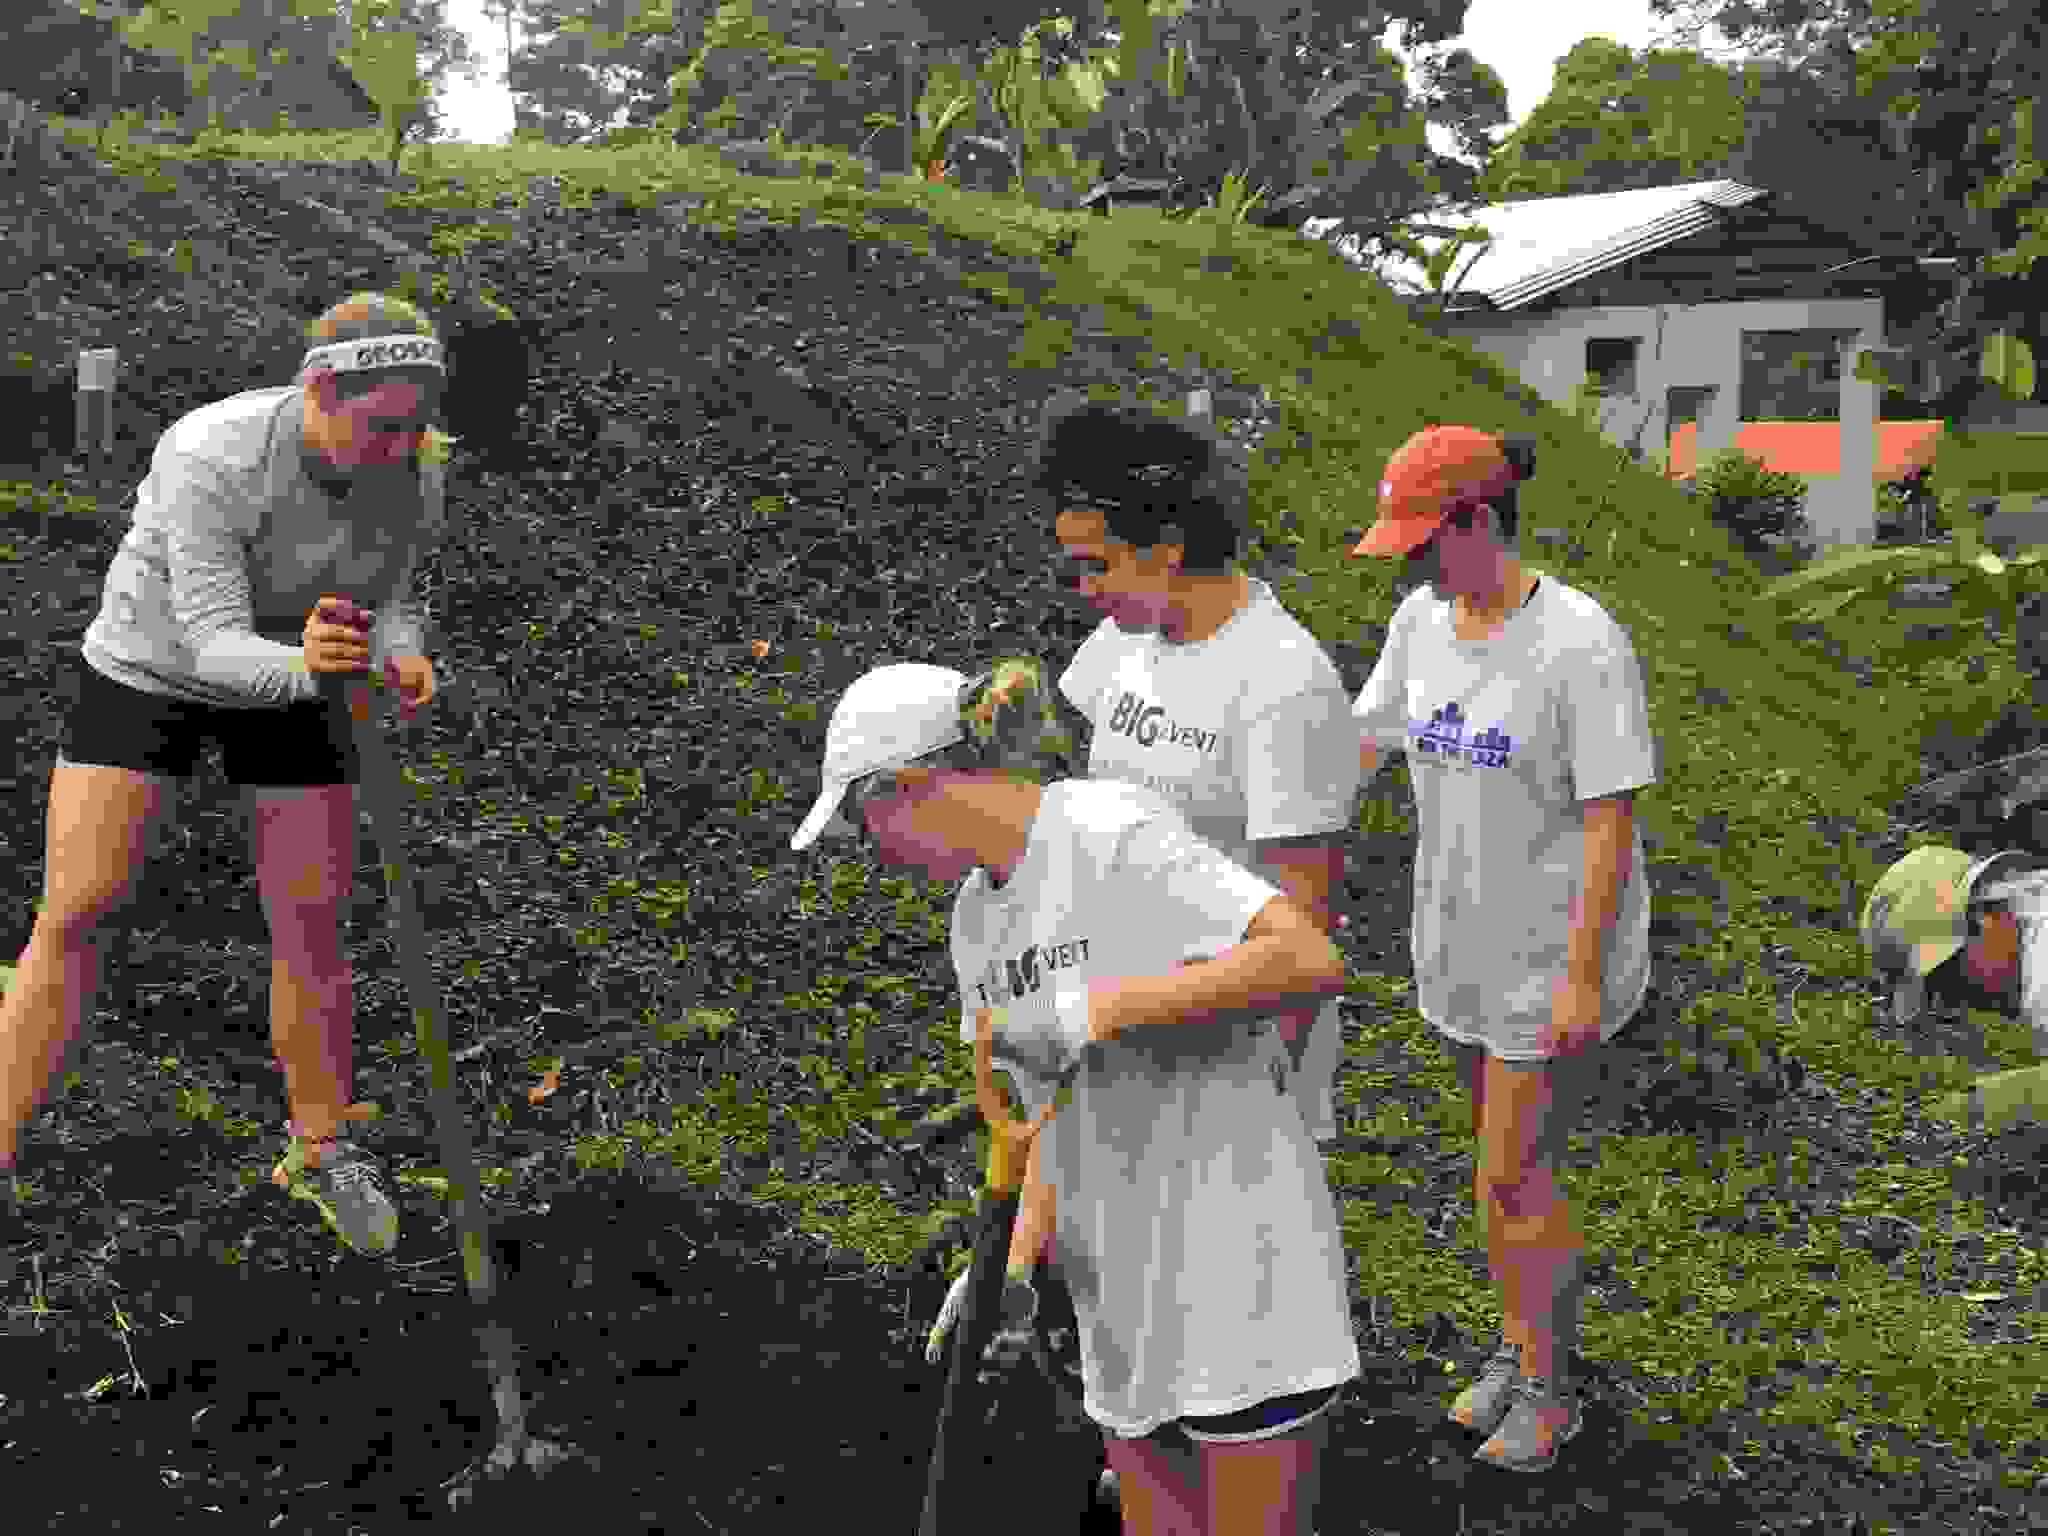 Texas A&M University students participate in the Water Security Initiative’s high impact service learning in Costa Rica.